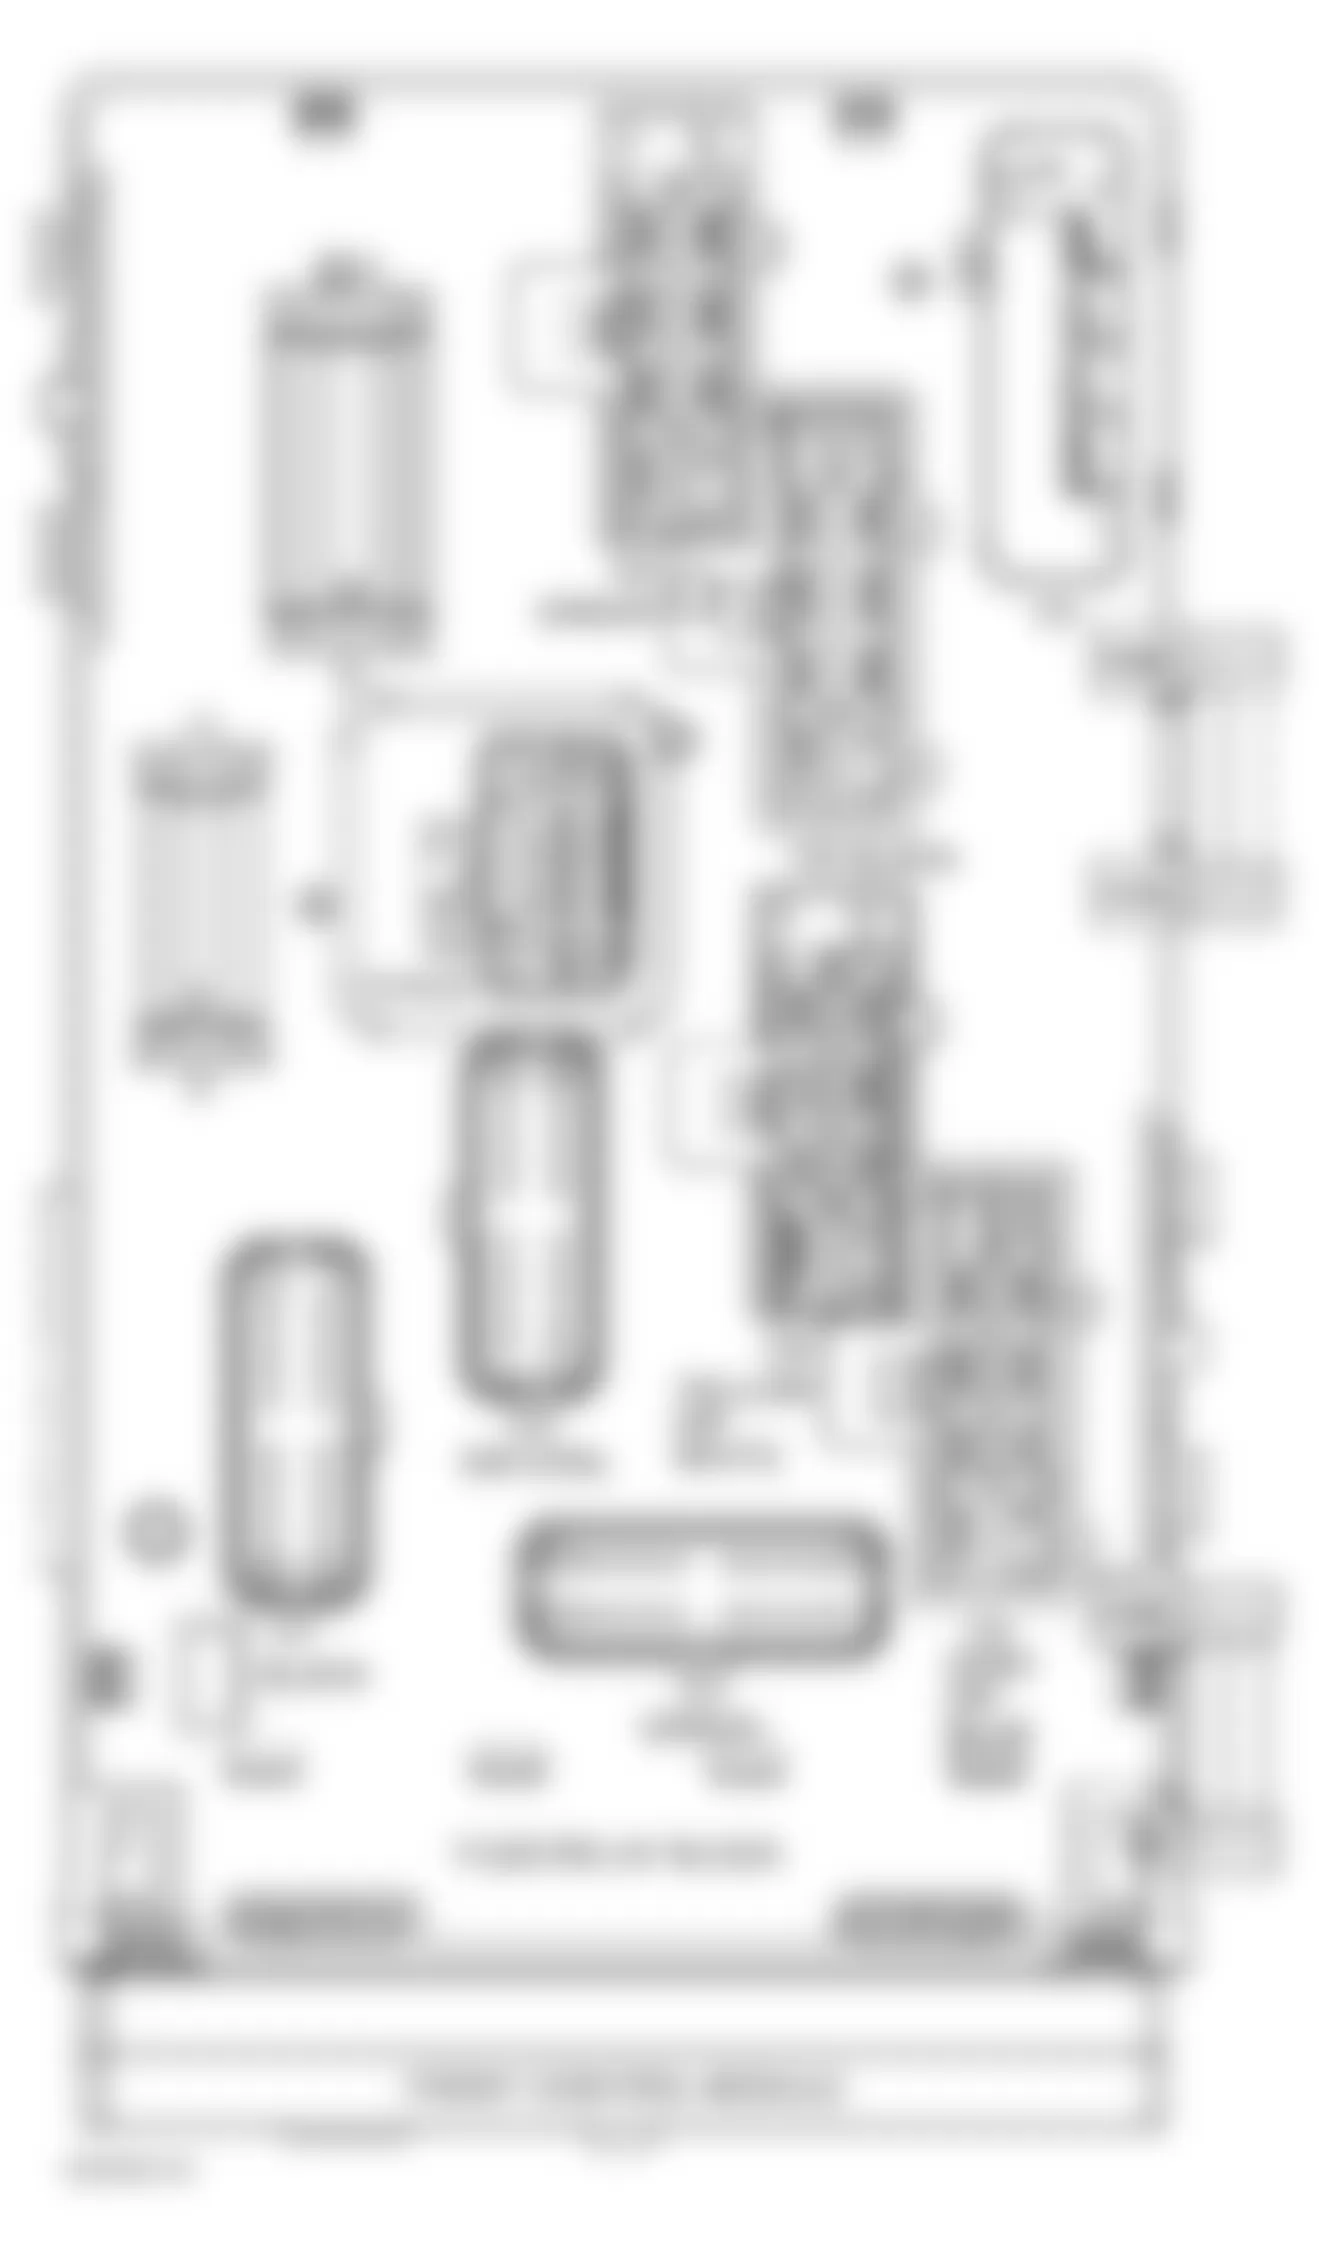 Chrysler Town & Country LXi 2001 - Component Locations -  Identifying Fuse & Relay Center (2 Of 2)